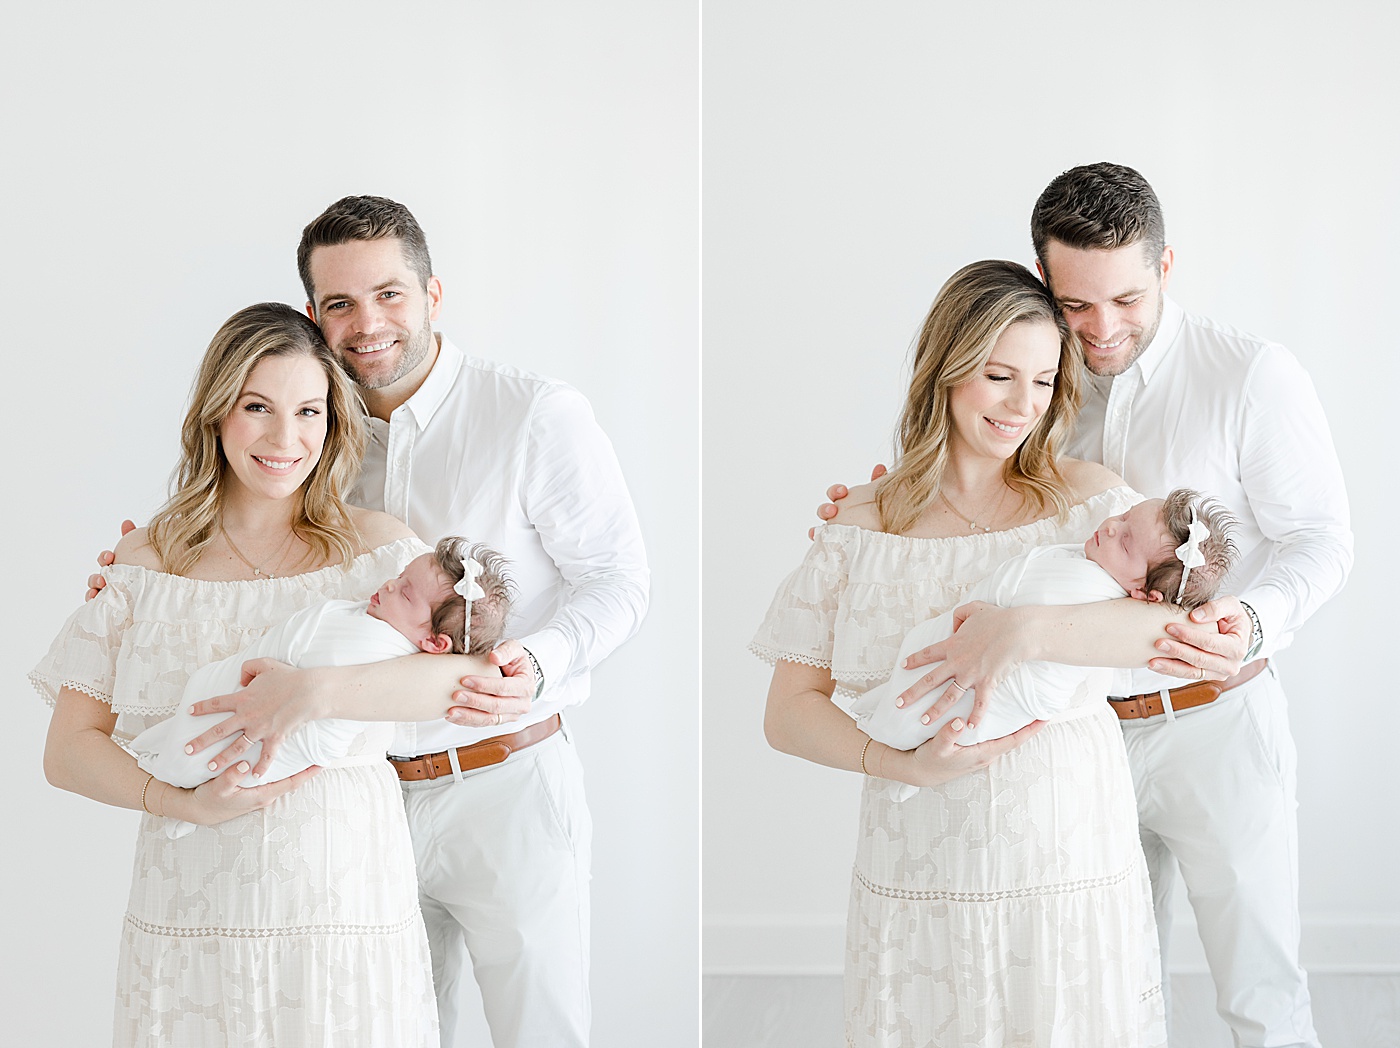 New parents with newborn baby girl | Kristin Wood Photography